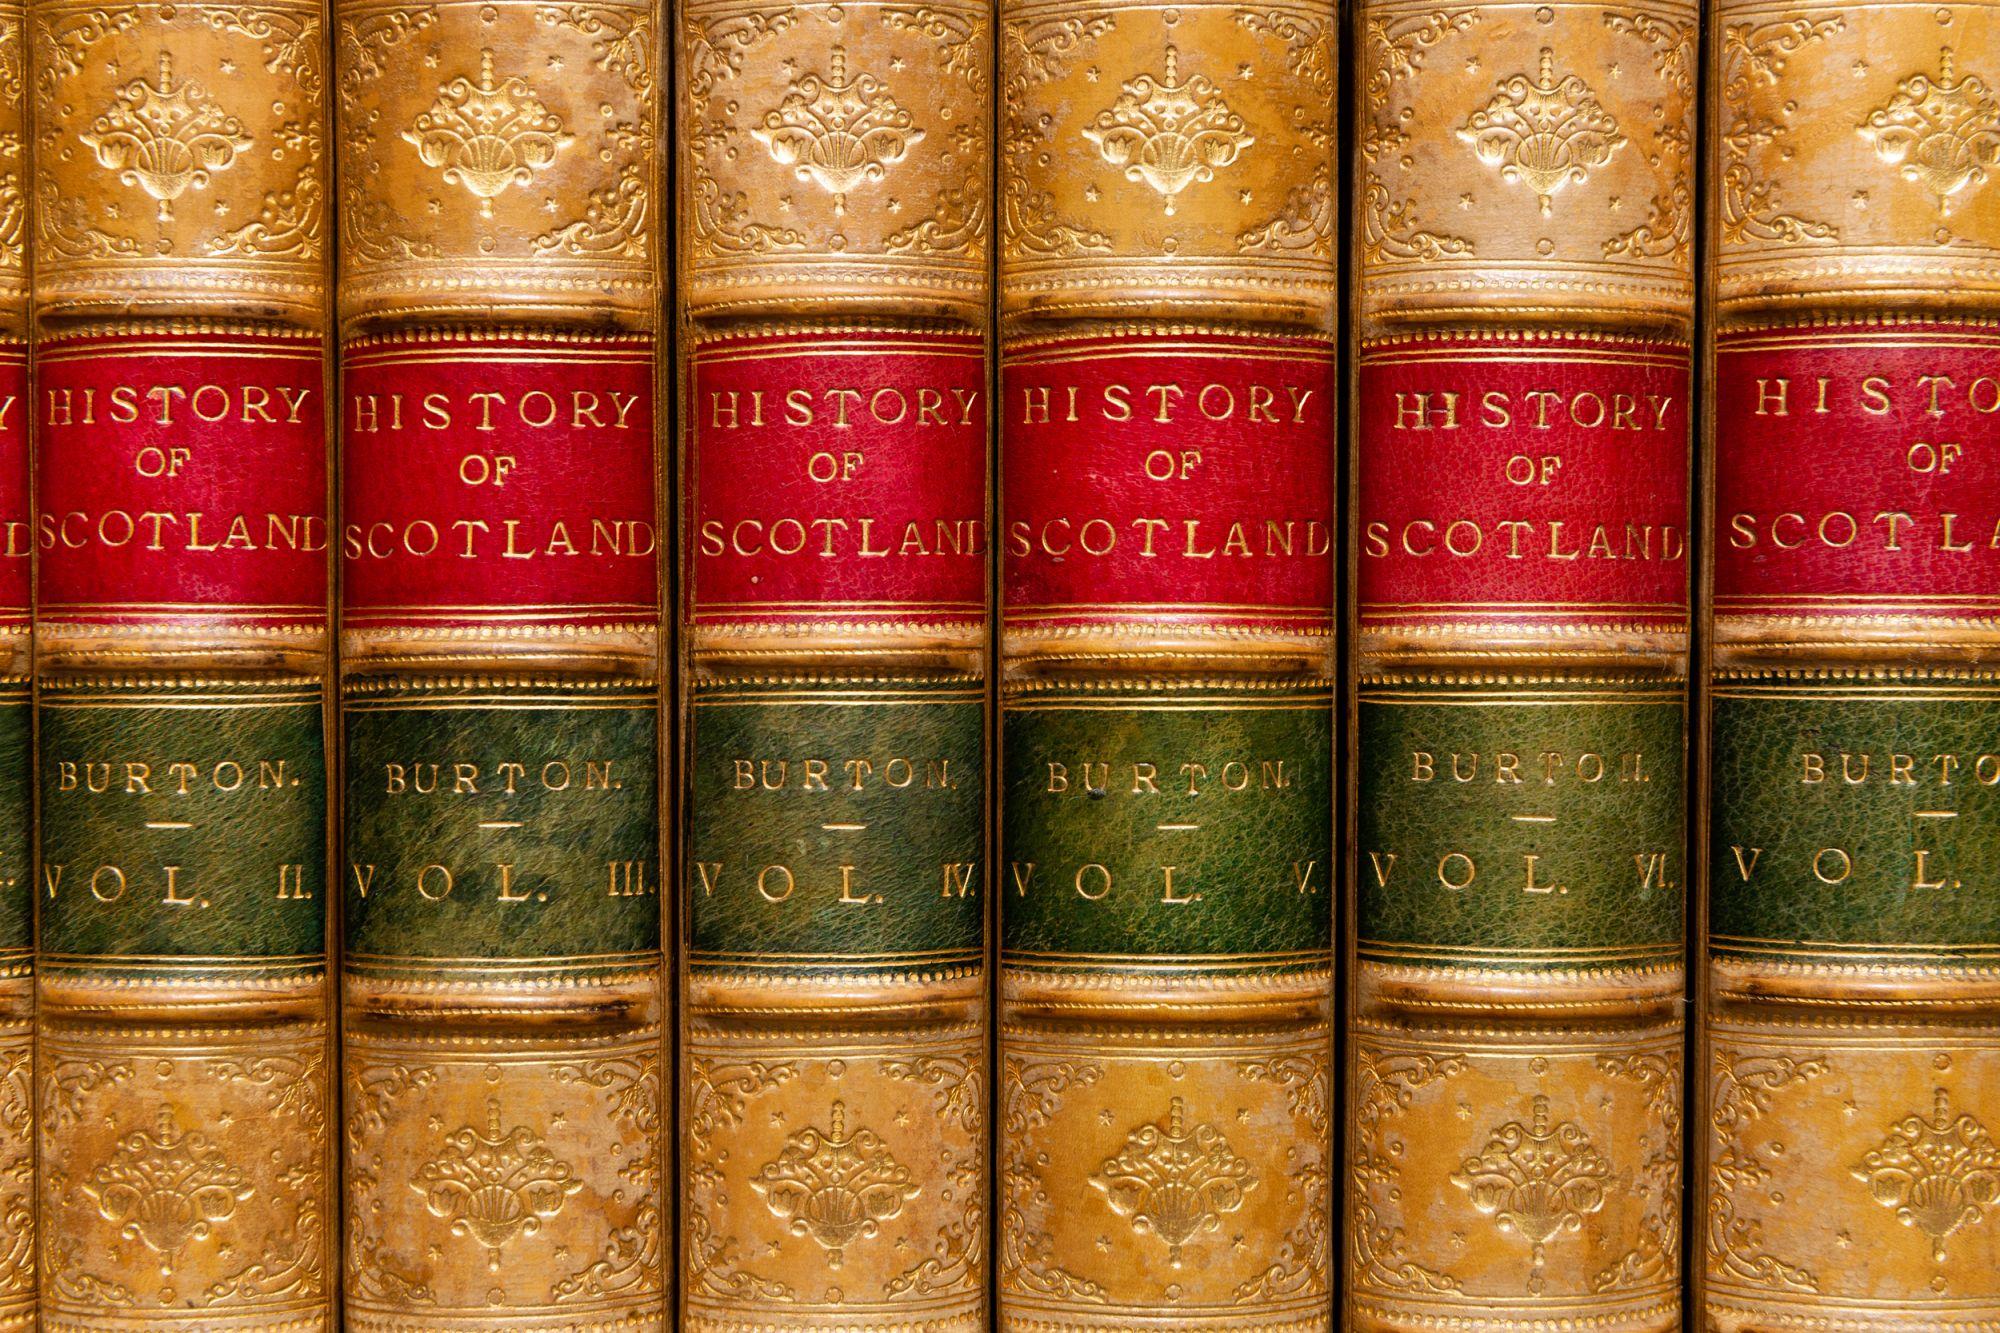 7 Volumes. John Hill Burton. The History of Scotland. From Agricola's Invasion To The Revolution of 1688. Bound in full tan calf. Marbled edges, marbled endpapers, raised bands, gilt on spines. Red and green labels. 
Published: Edinburgh & London: